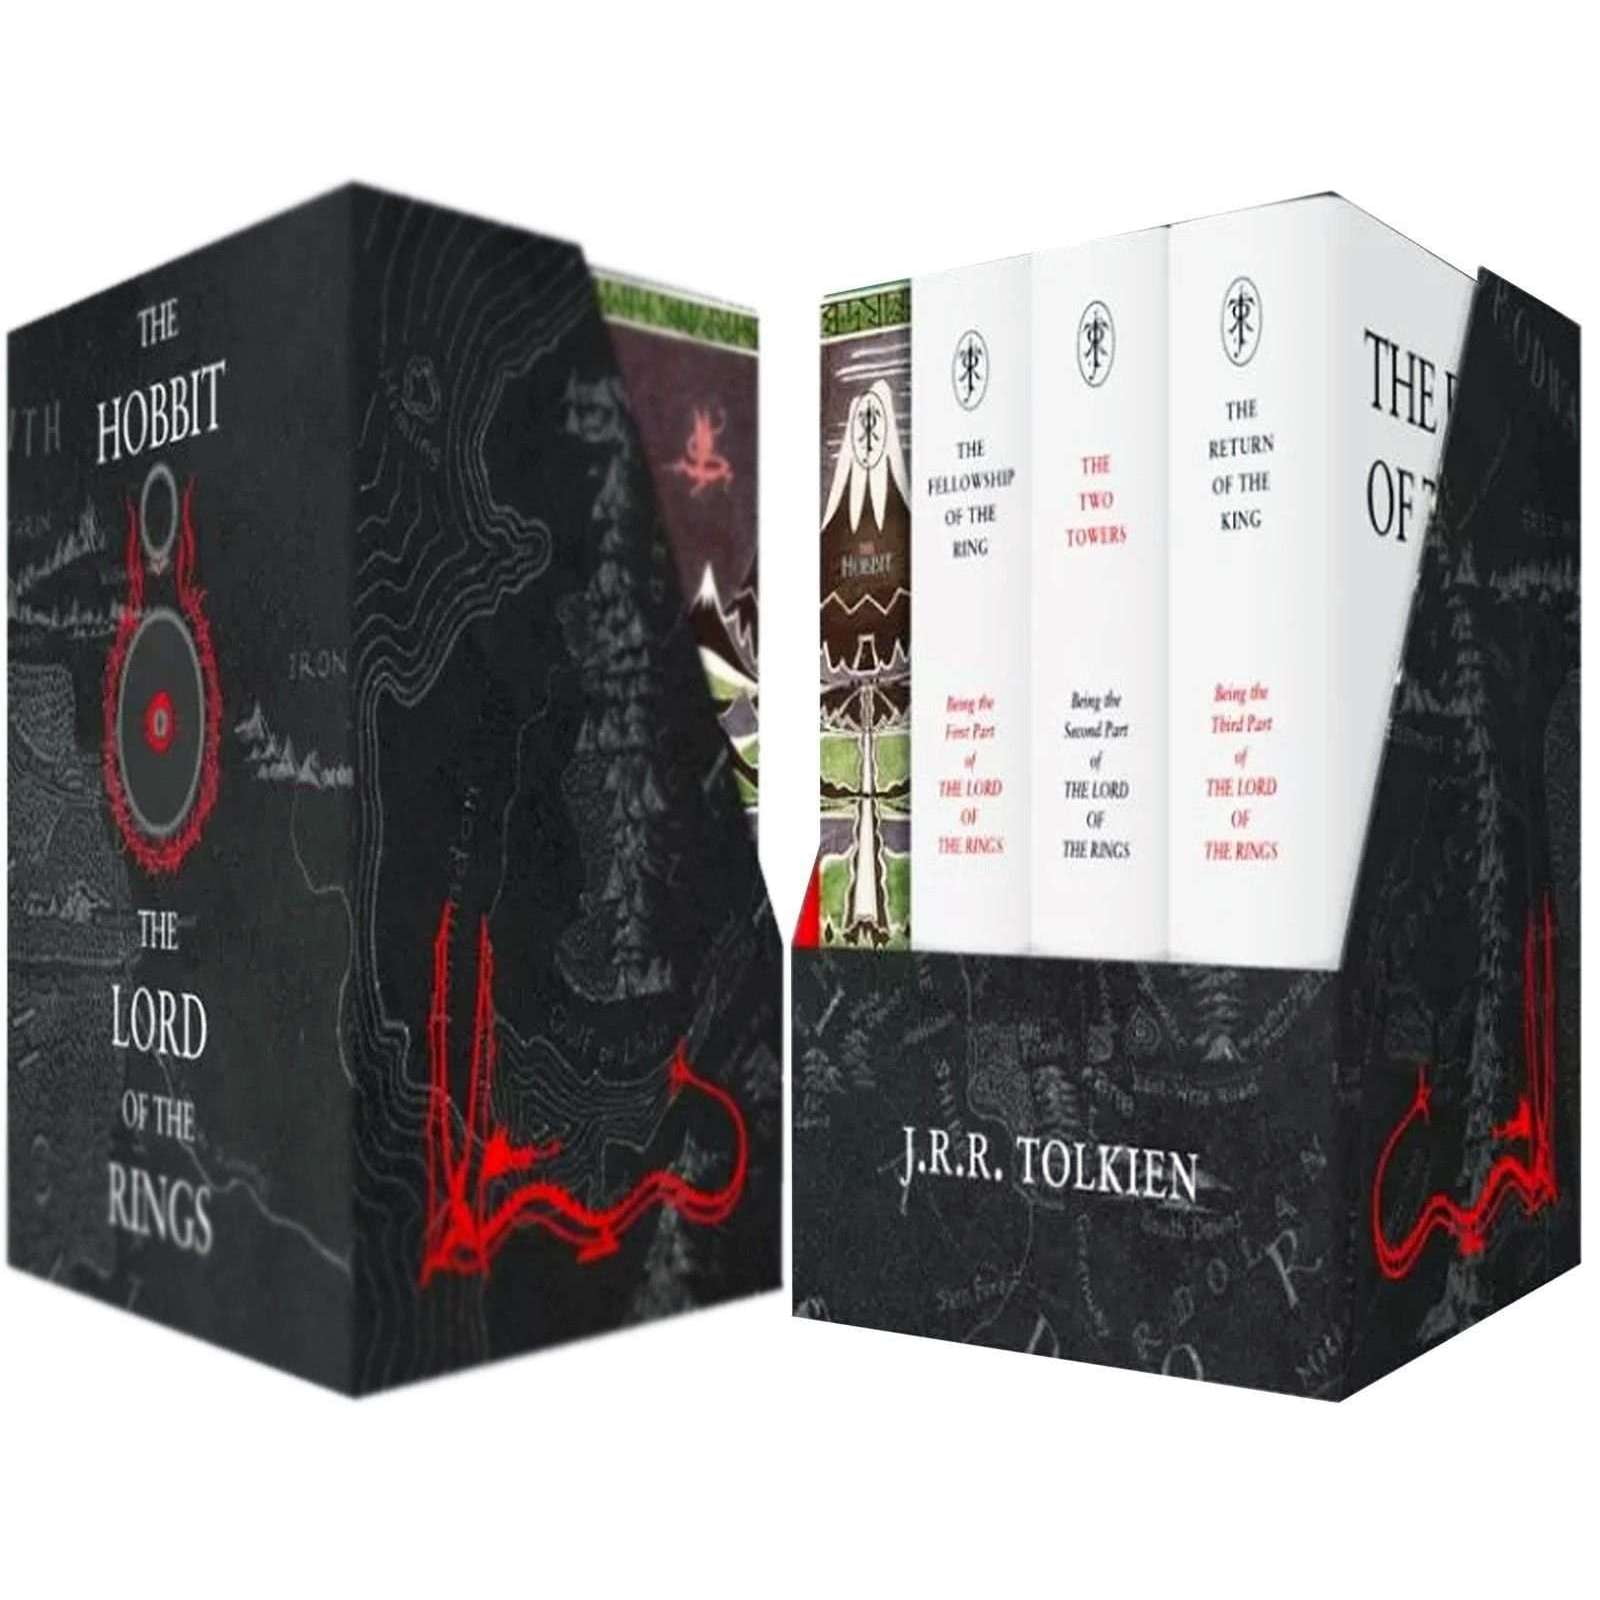 The Hobbit & The Lord of the Rings Gift Set: A Middle-earth